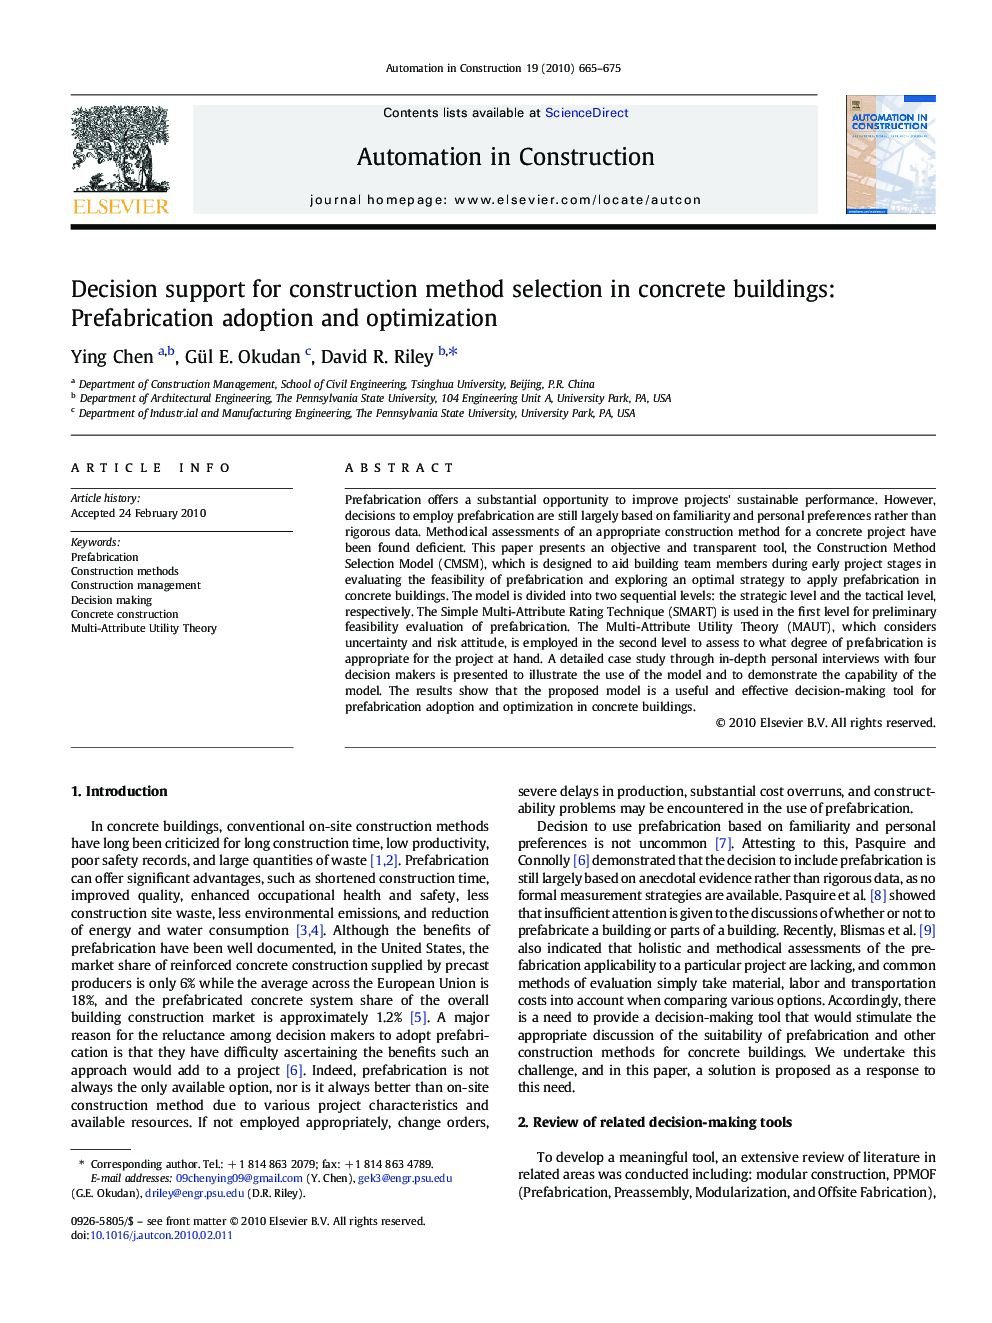 Decision support for construction method selection in concrete buildings: Prefabrication adoption and optimization